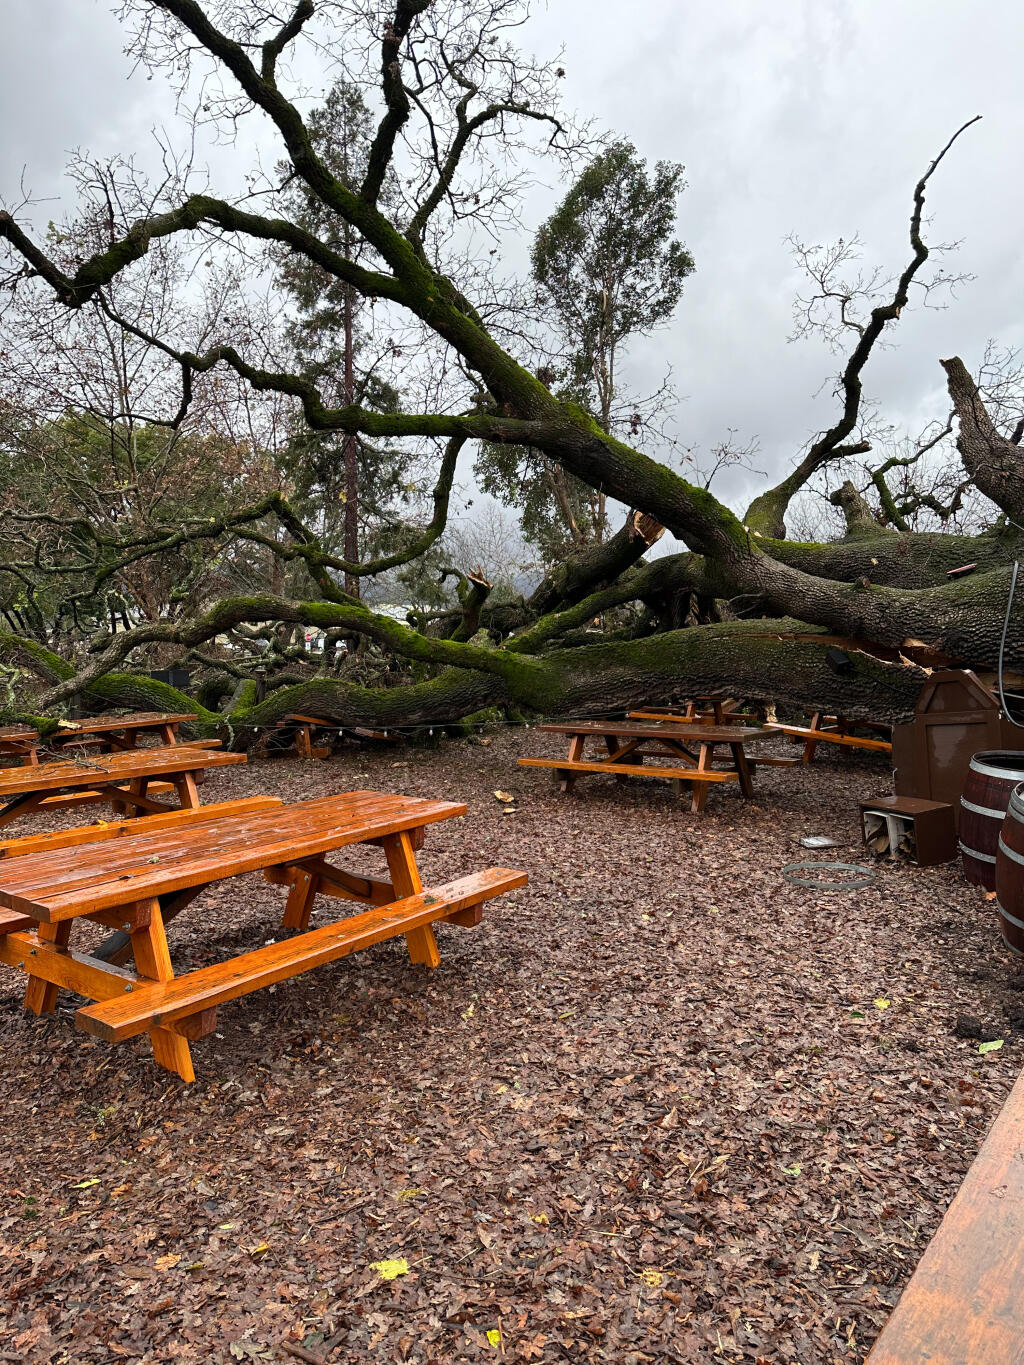 V. Sattui workers are grieving the loss of a 275-year-old oak tree that came toppling to the ground around 4 a.m. Monday, Jan. 9, 2023. Damage to the tree and picnic area is seen here later that day. (Tom Davies / V. Sattui photo)